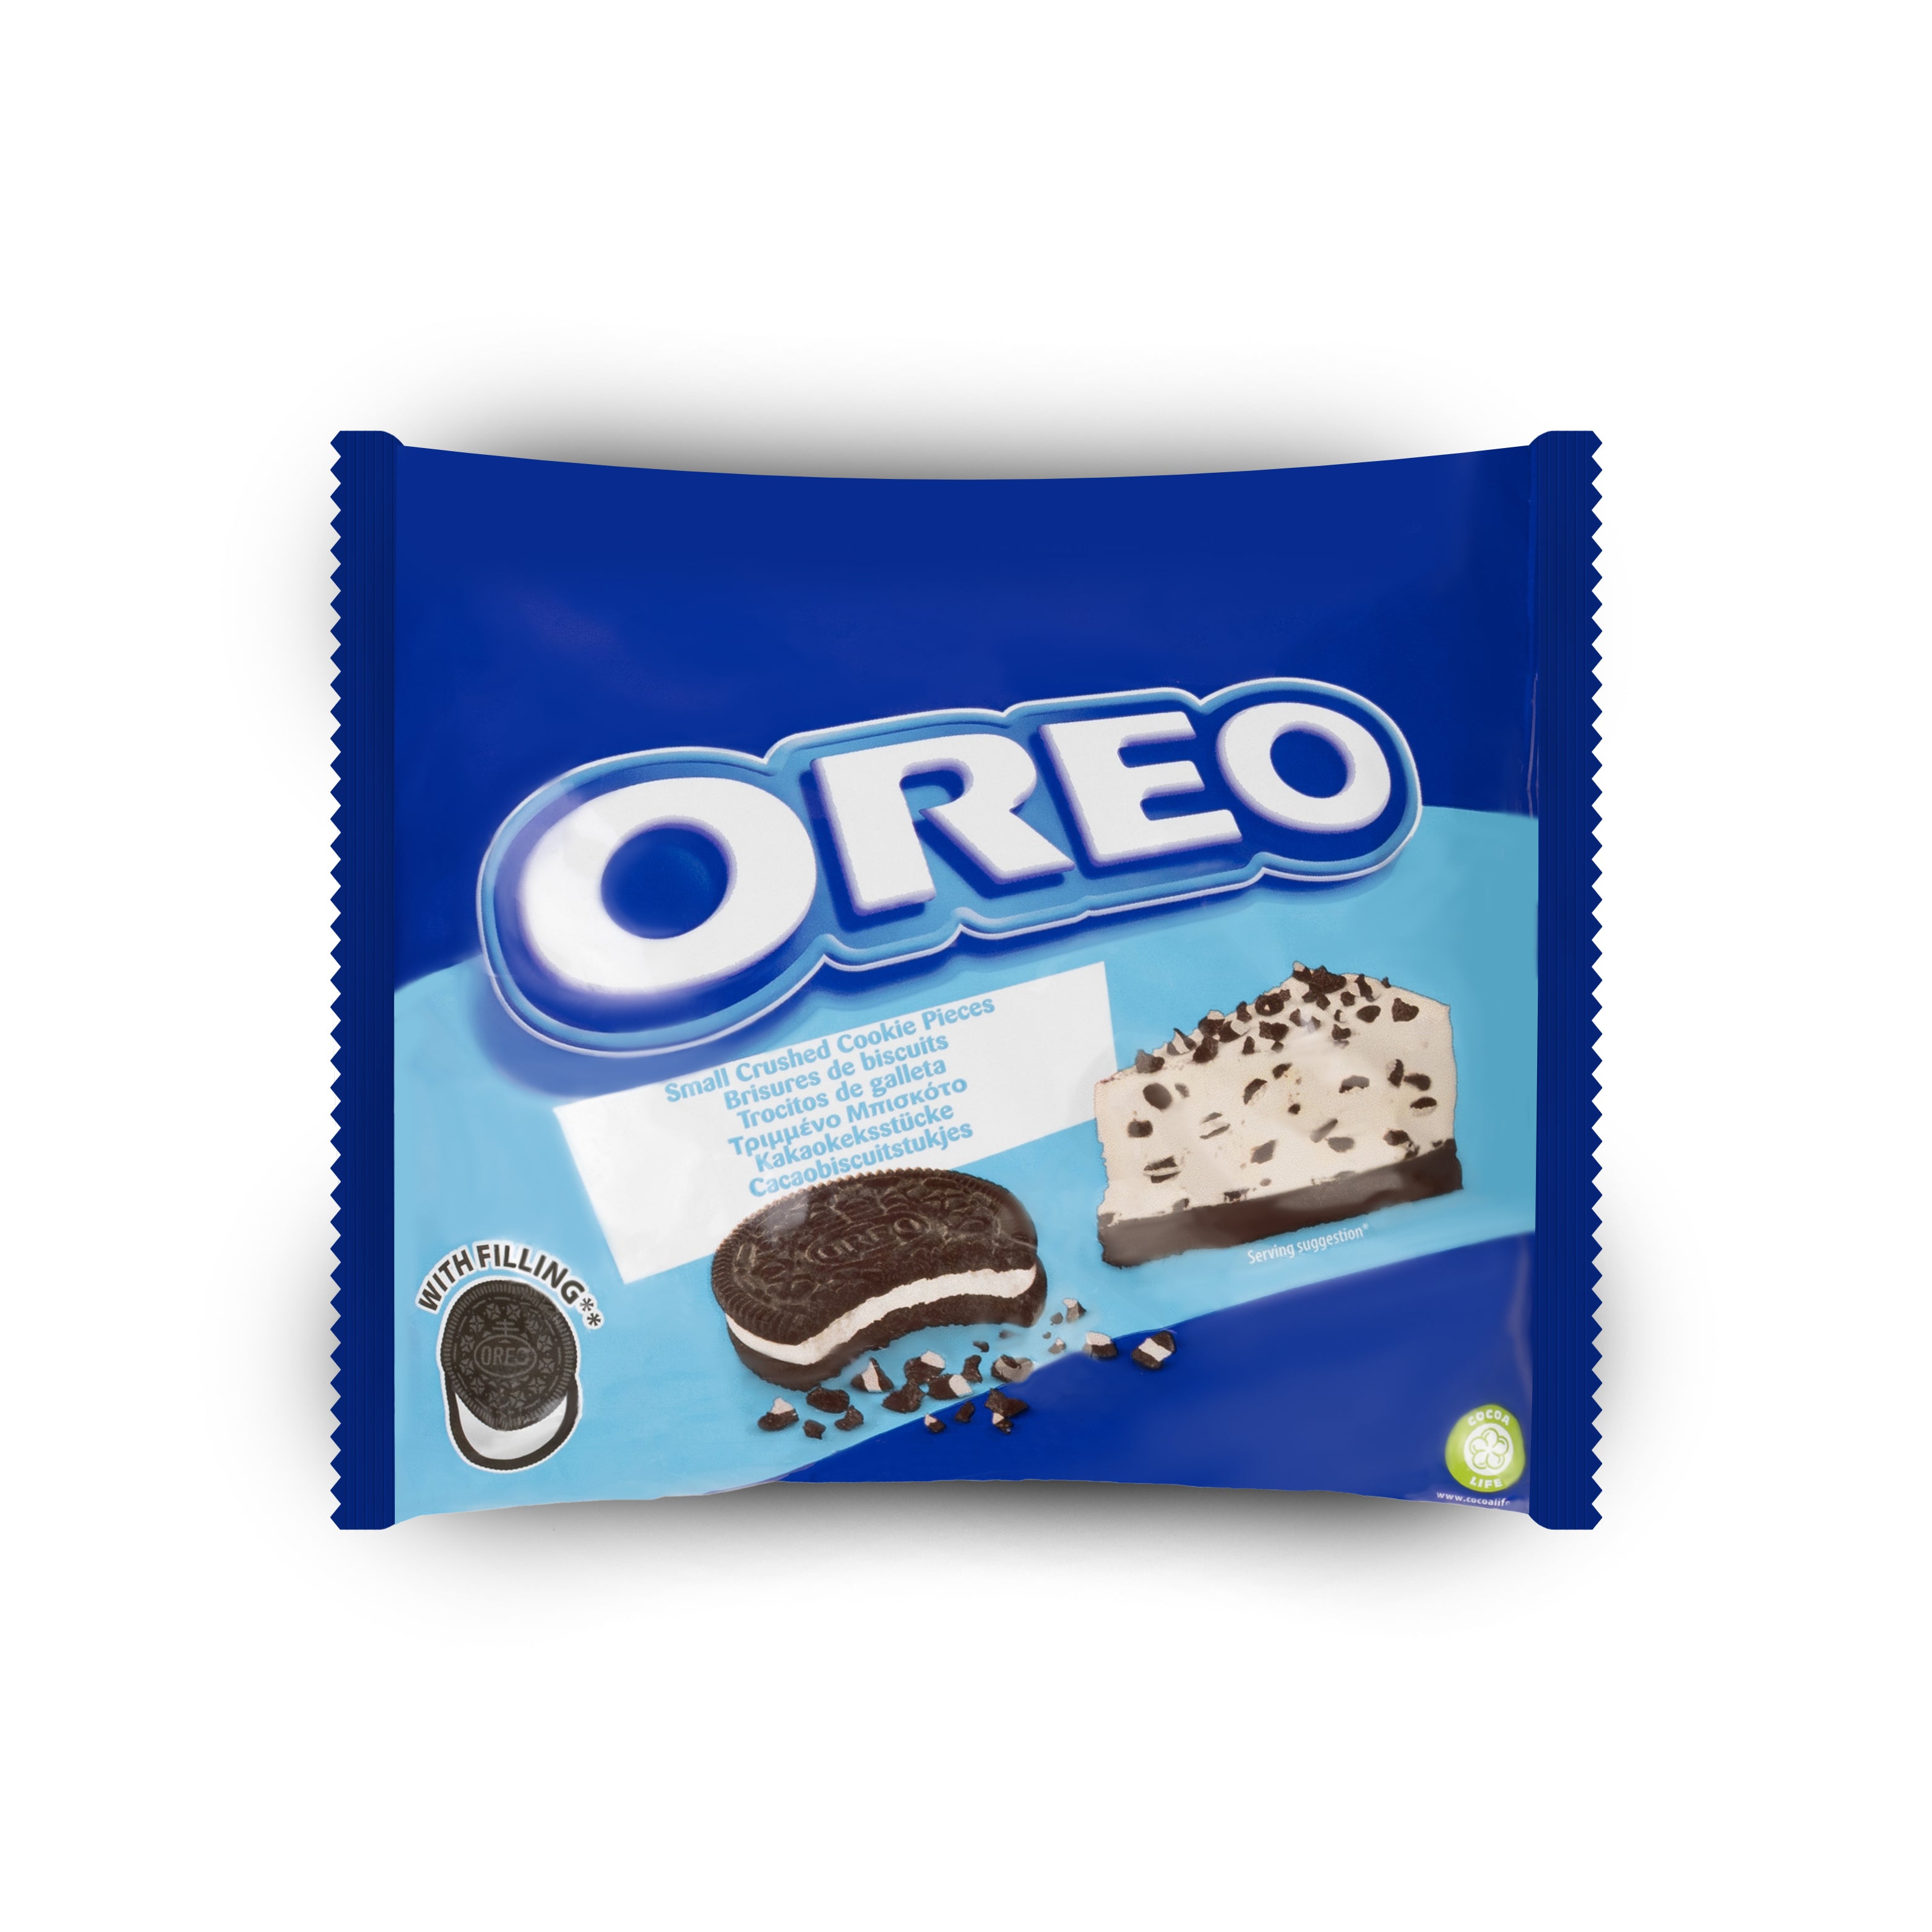 Oreo Crumb Inclusion Topping - 400g